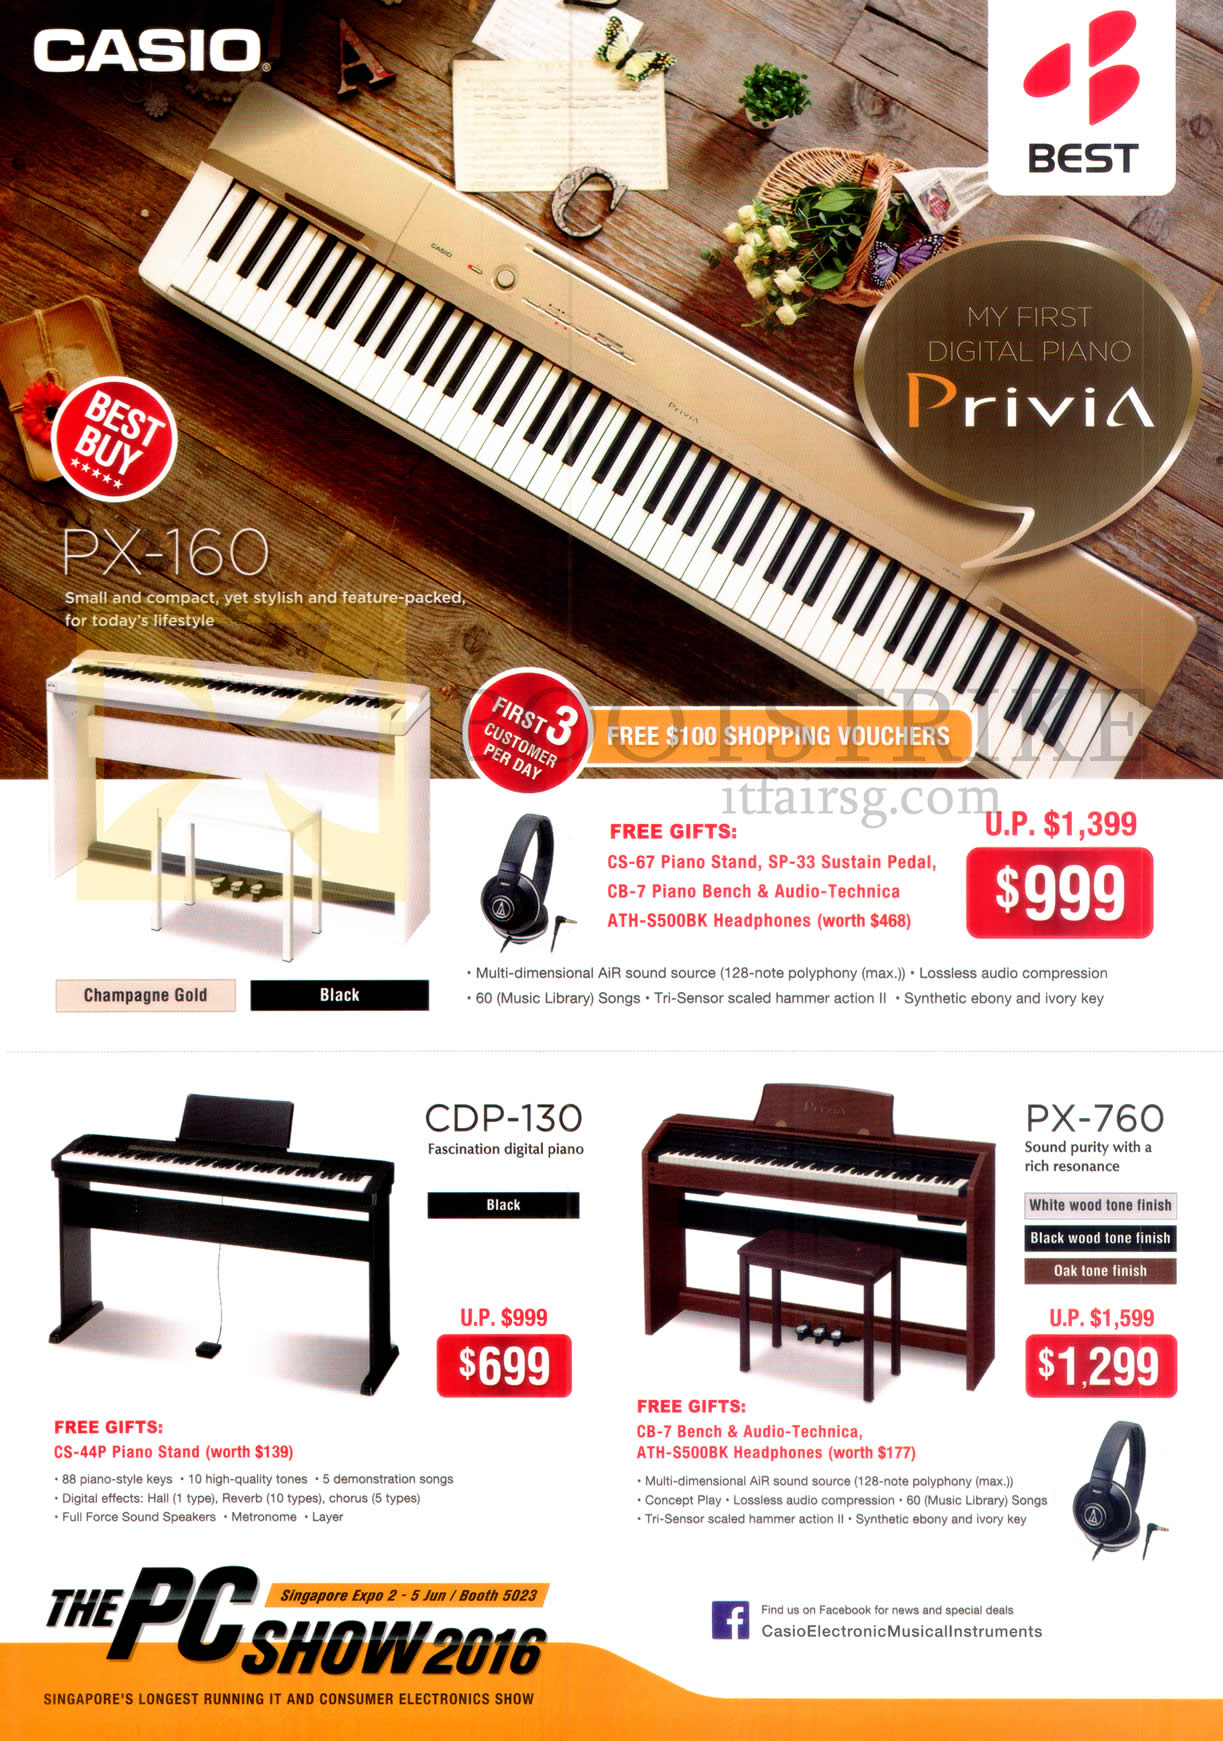 PC SHOW 2016 price list image brochure of Best Denki Casio Piano Keyboards Privia PX-160, 760, CDP-130